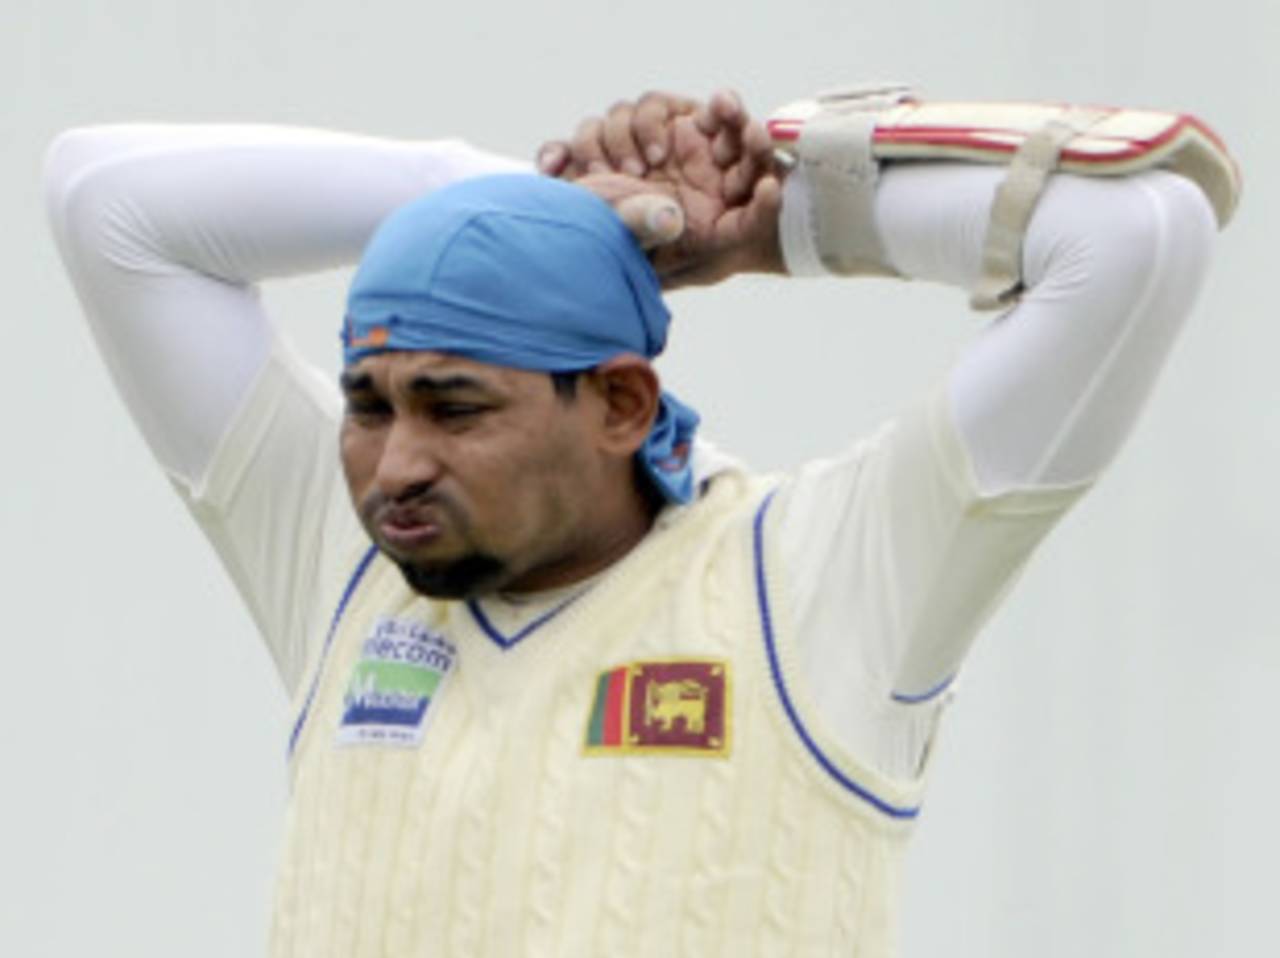 Tillakaratne Dilshan has taken several blows to the right thumb in the course of the series&nbsp;&nbsp;&bull;&nbsp;&nbsp;Associated Press